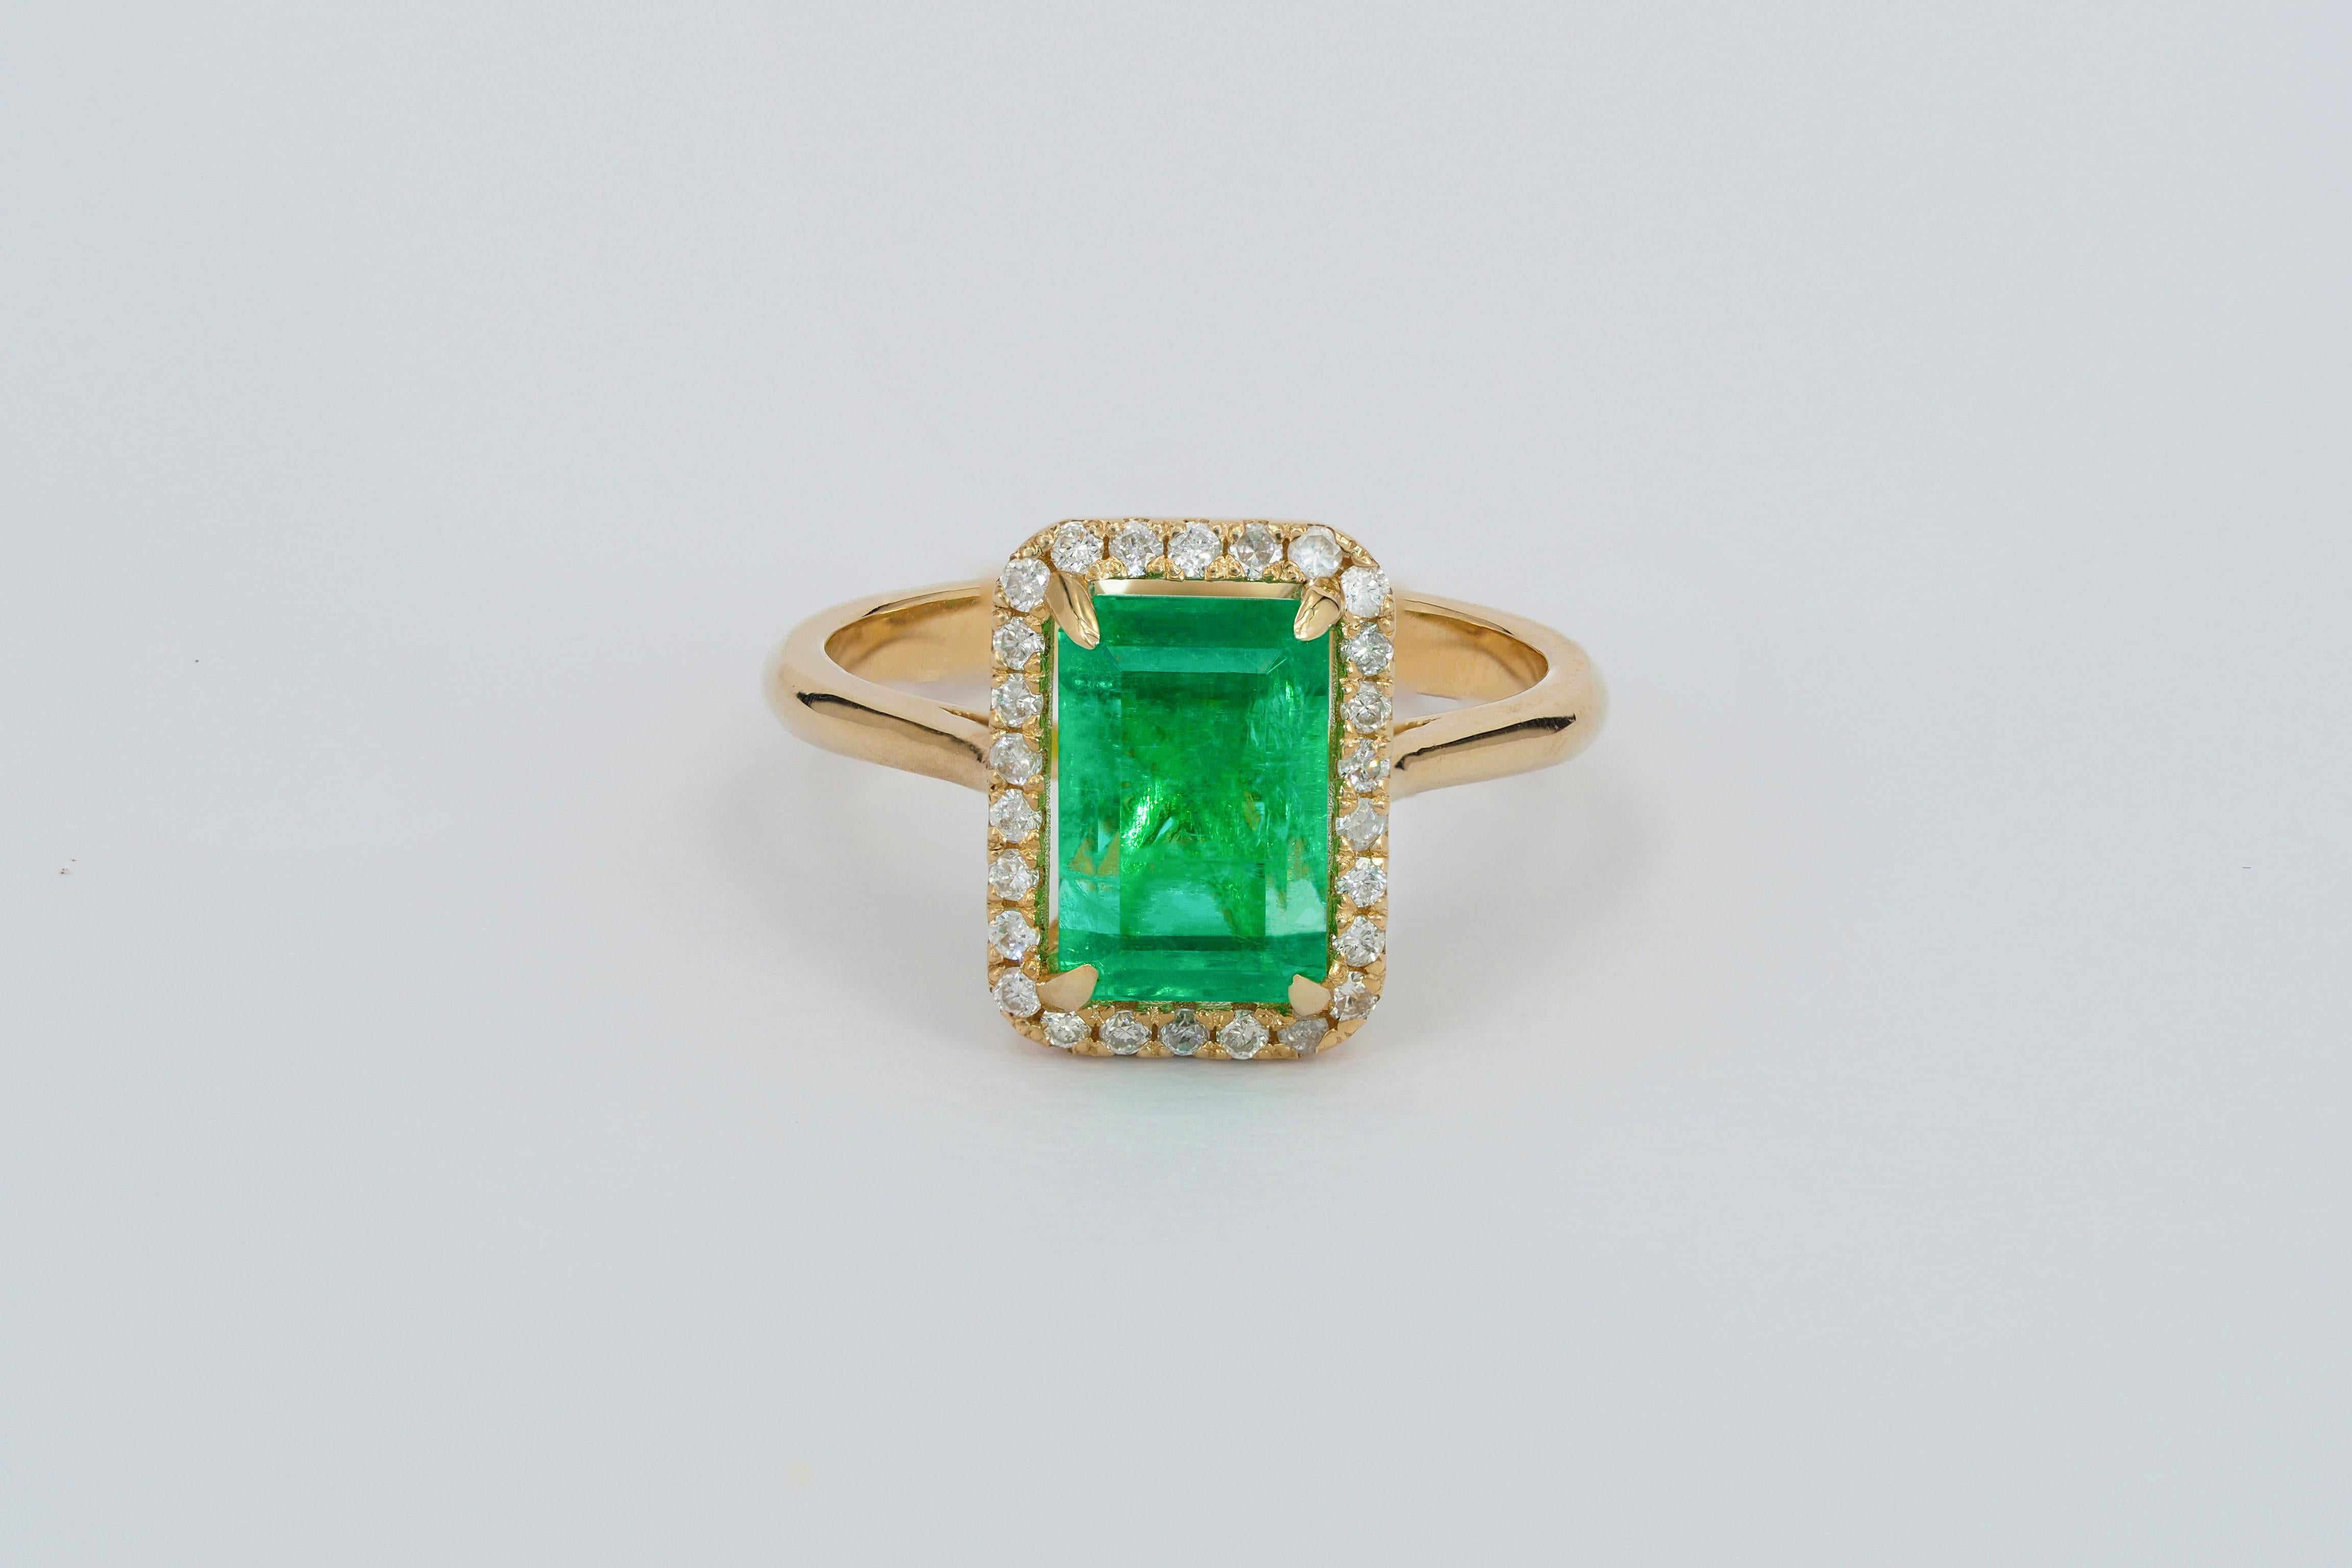 14 kt solid gold ring with certified natural emerald and diamonds. Exclusive ring. May birthstone.
Size: (US - 7.5) 
Weight: 3.90 g.

Central stone: Natural emerald
Emerald cut, weight - 2.71 ct (9.47 x 6.23 x 5.46 mm)
Clarity: Transparent, color -